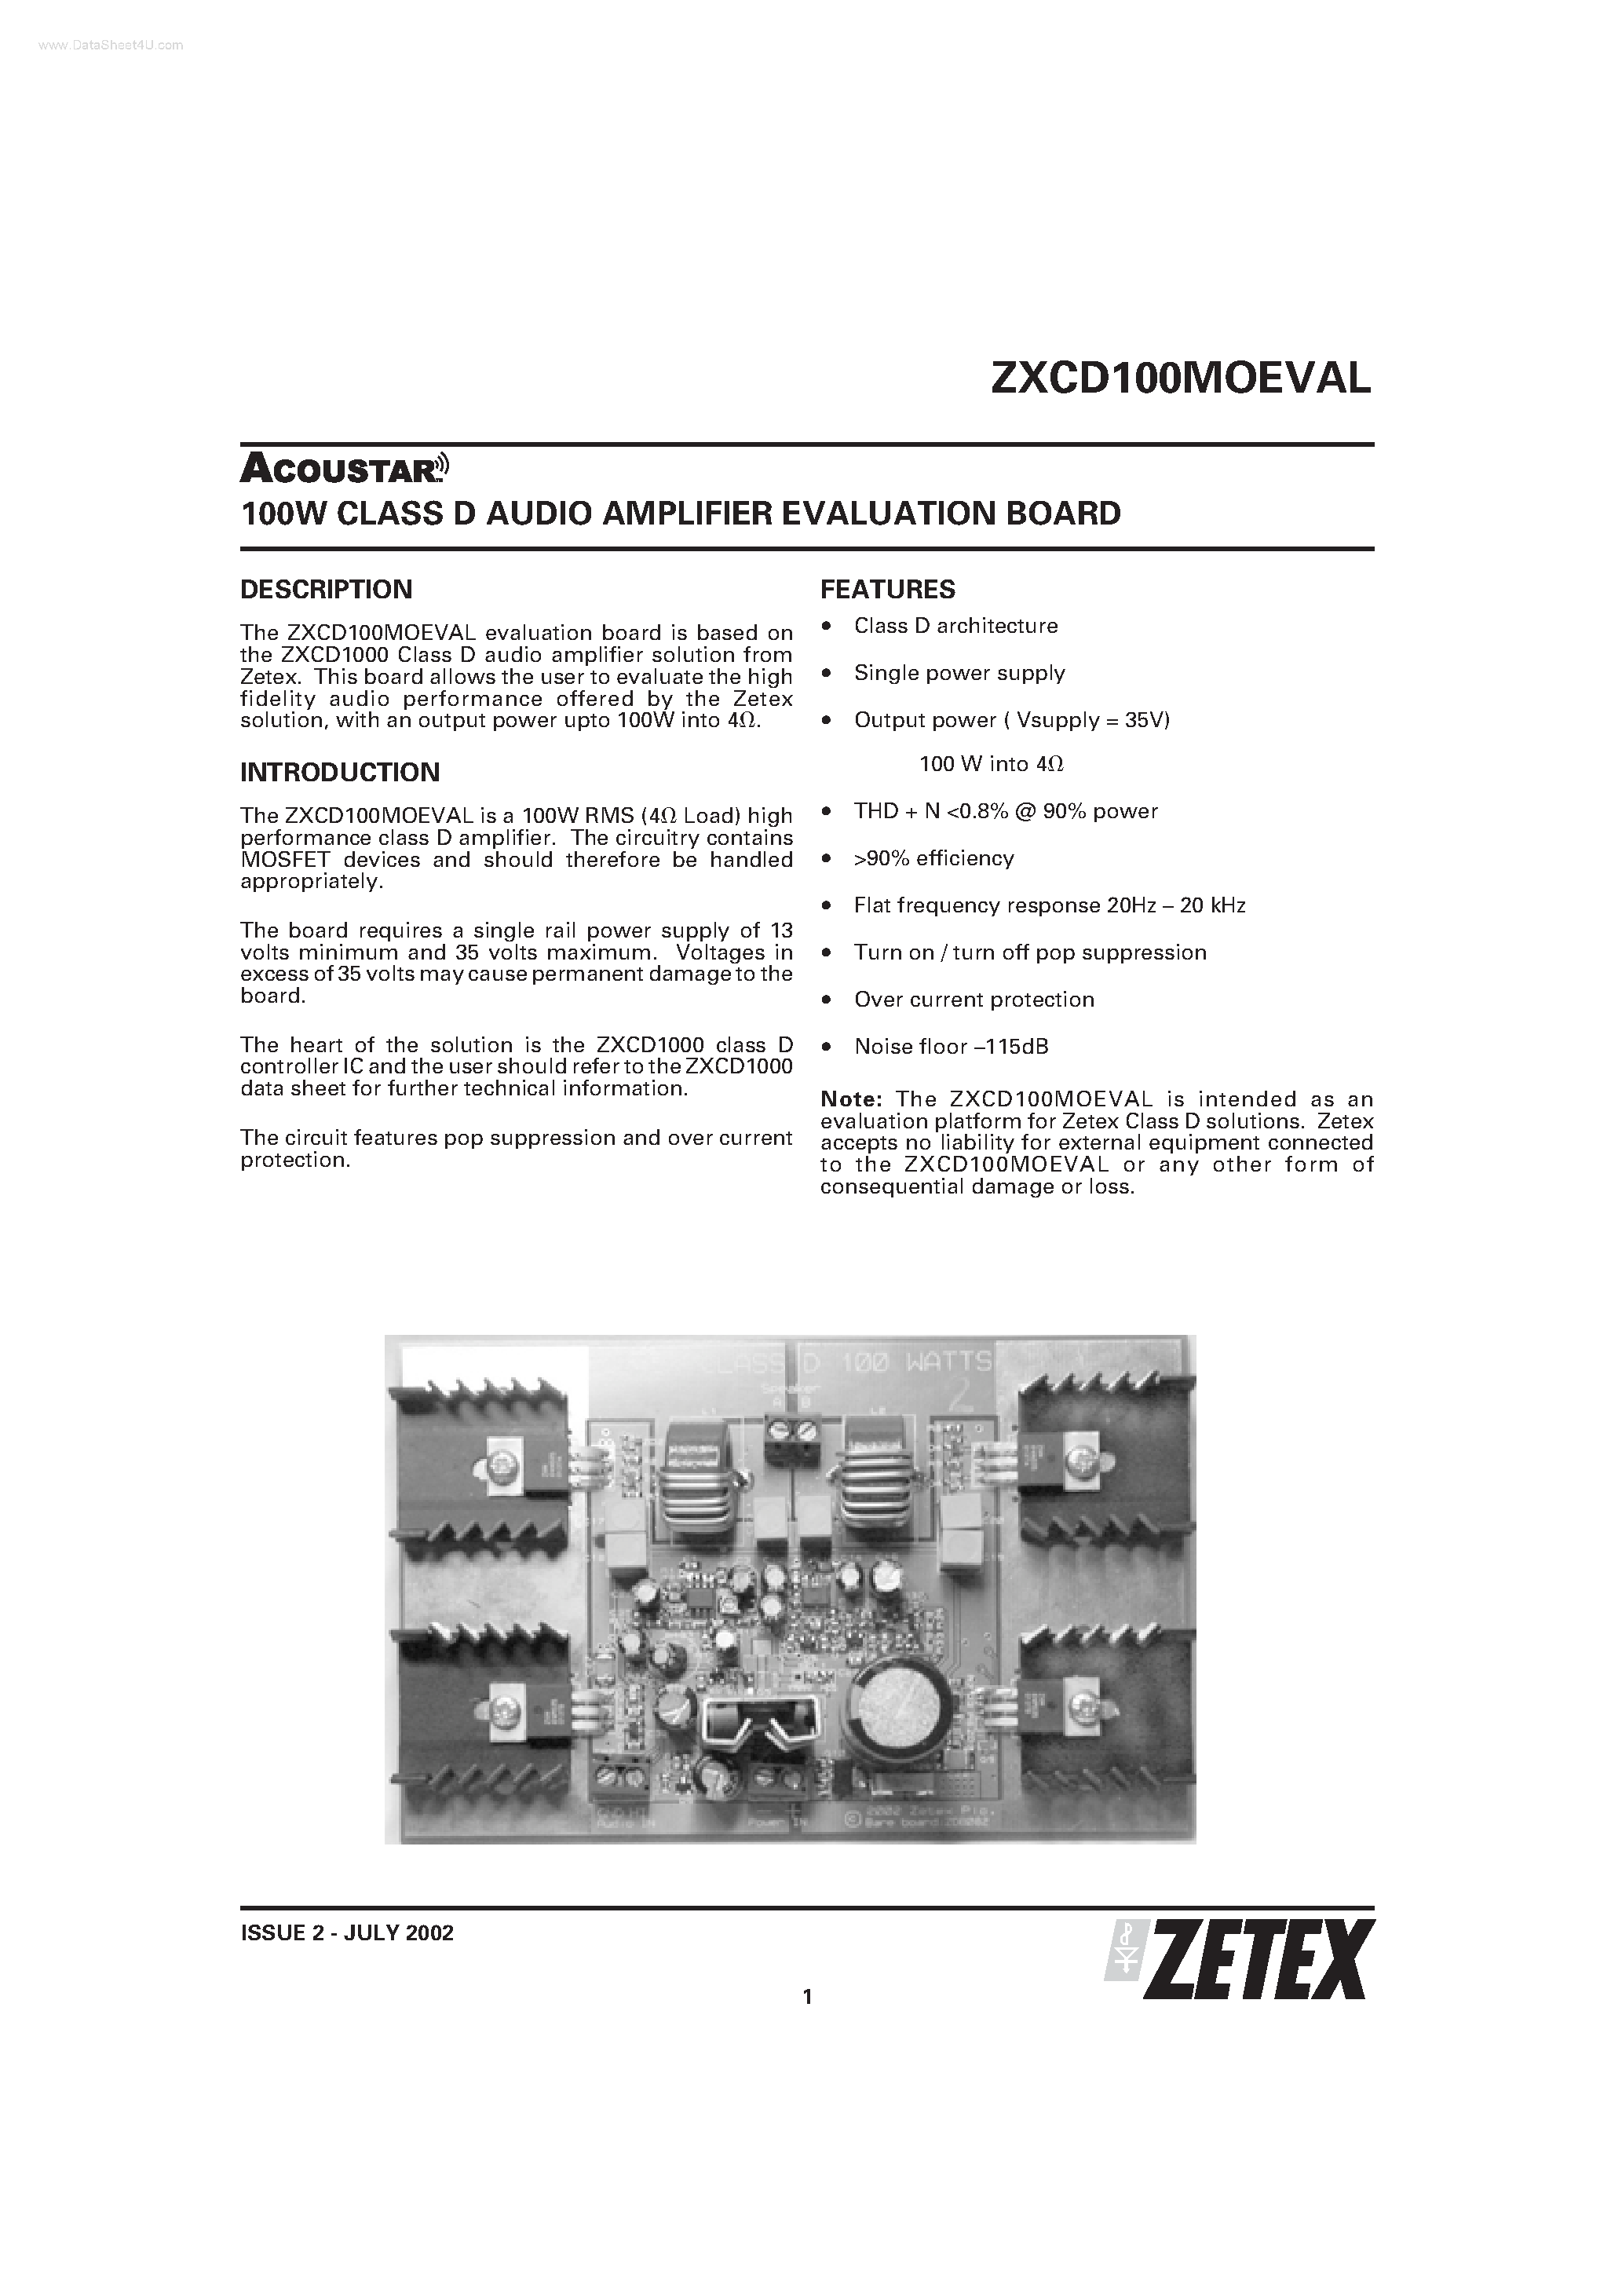 Datasheet ZXCD100MOEVAL - 100W CLASS D AUDIO AMPLIFIER EVALUATION BOARD page 1